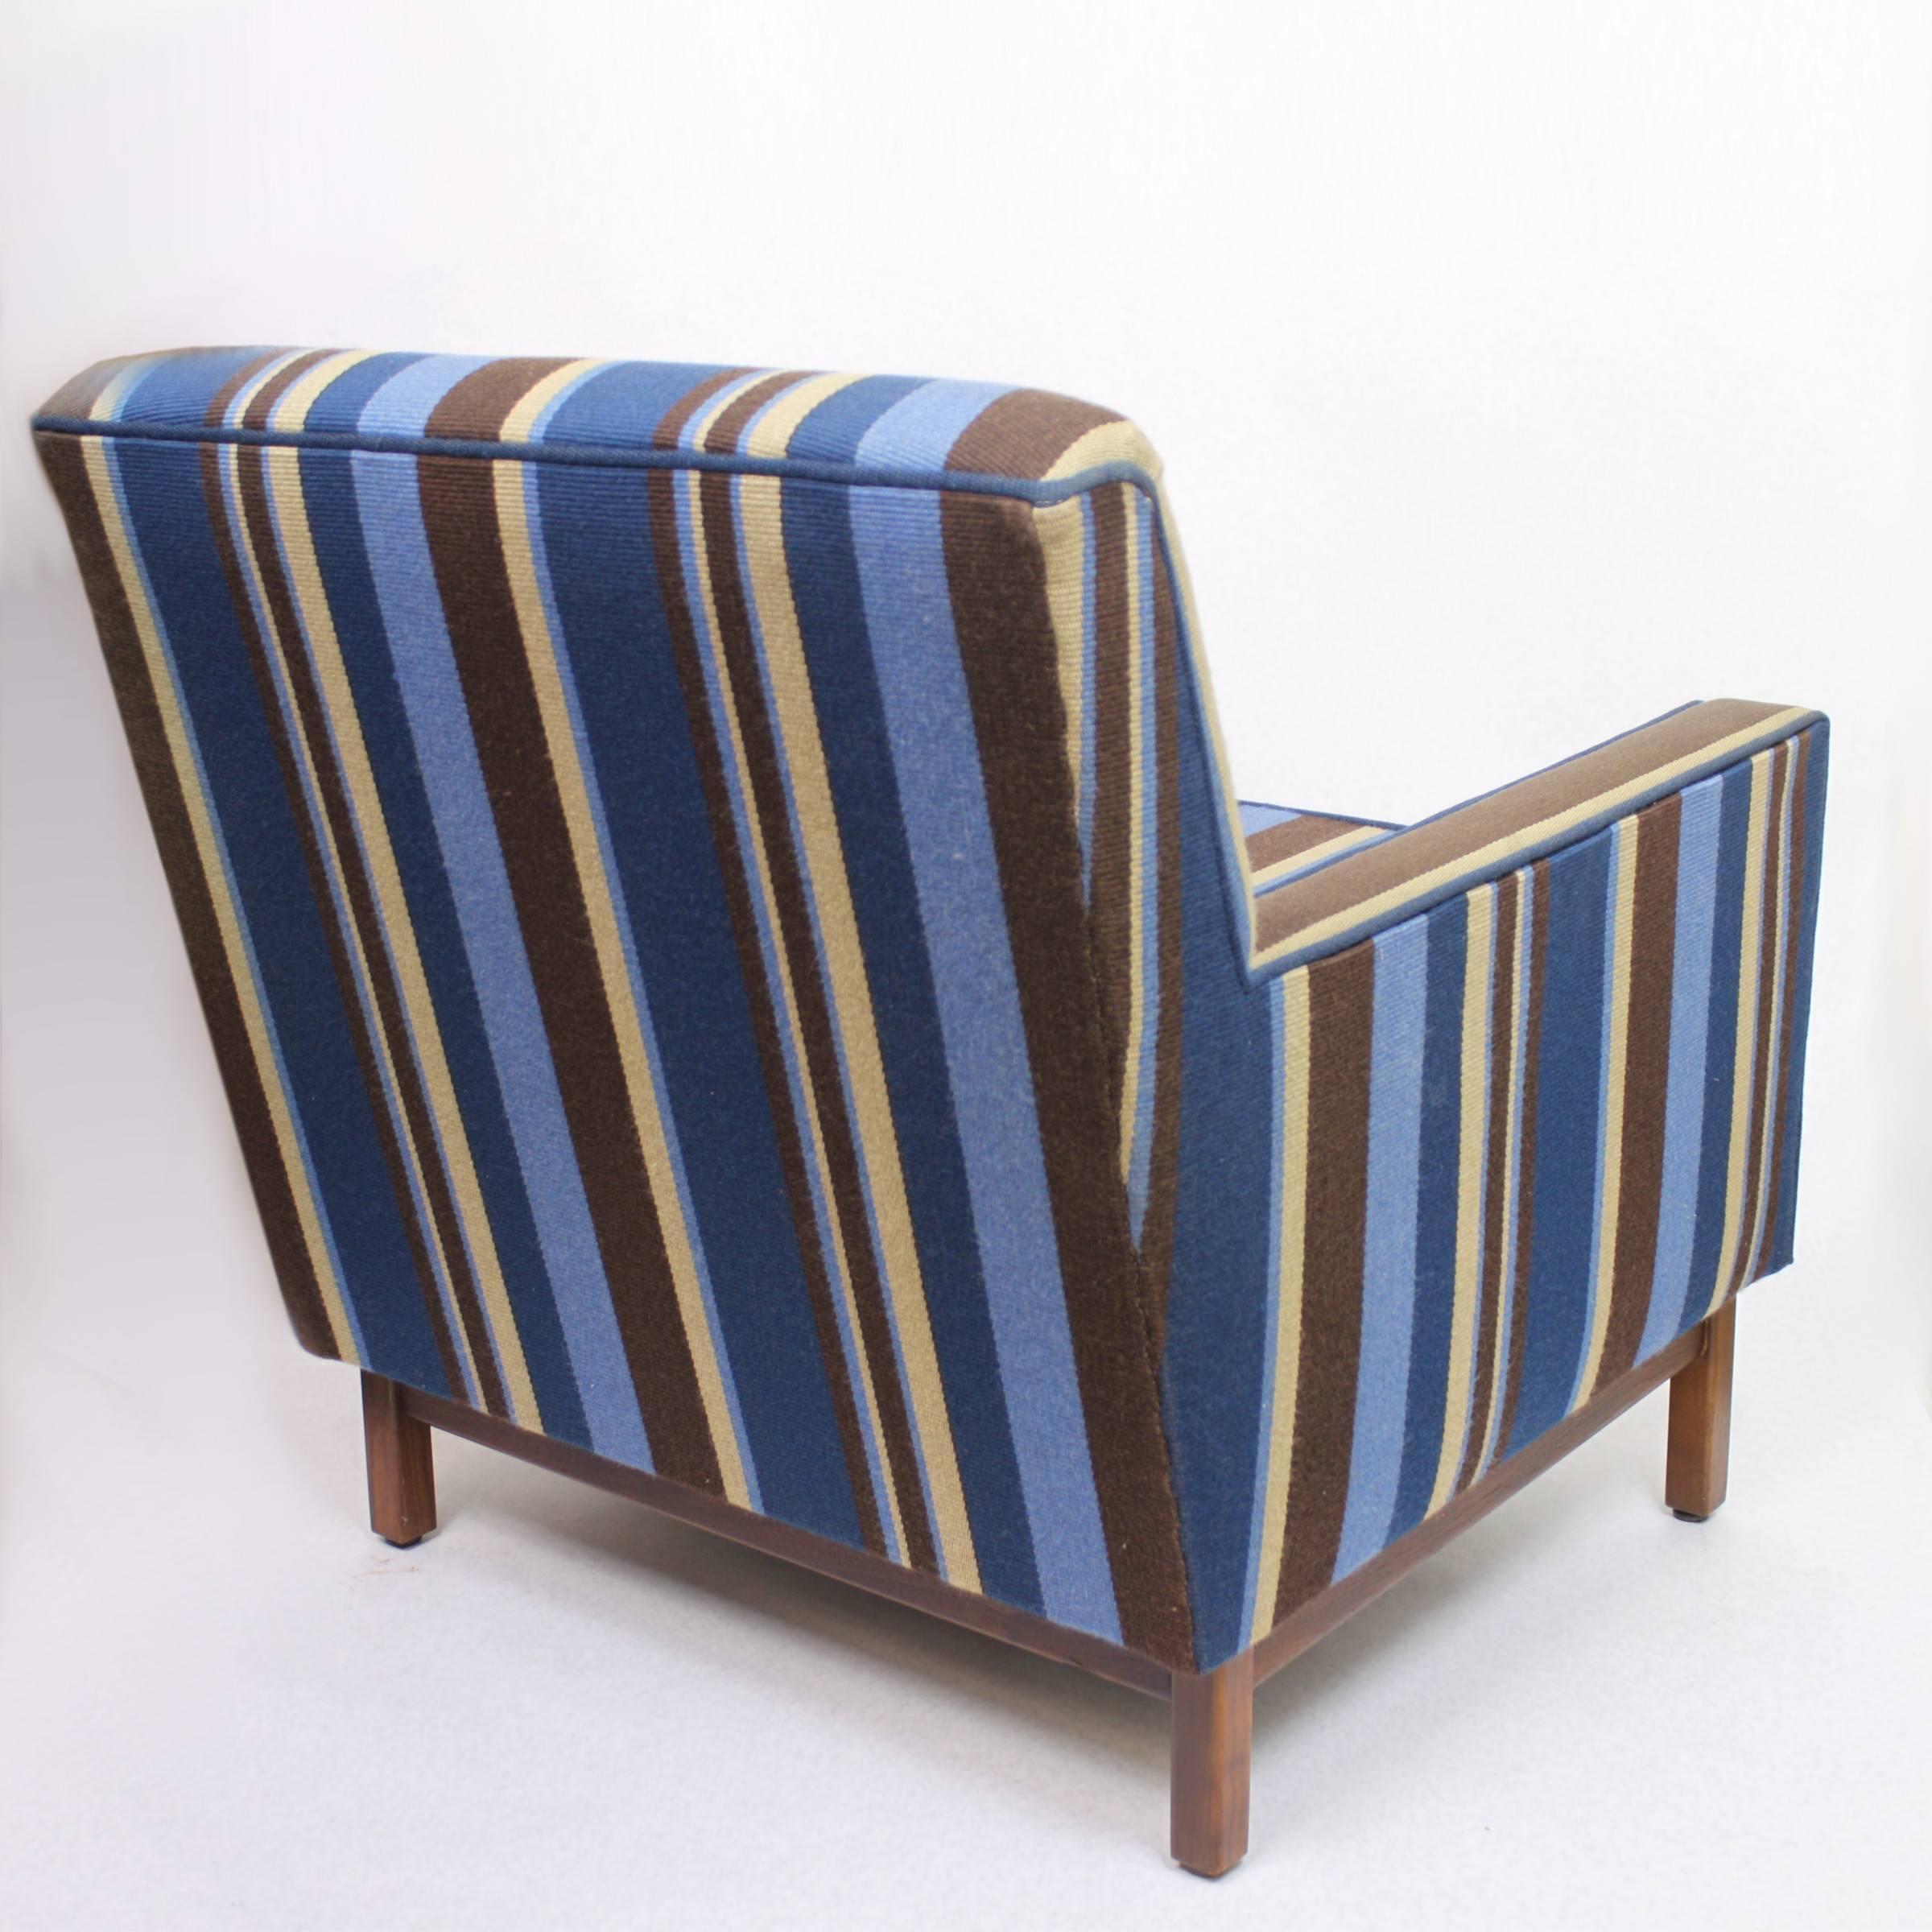 Spectacular Pair of Mid-Century Modern Blue Striped Lounge Chairs by Gunlocke 1